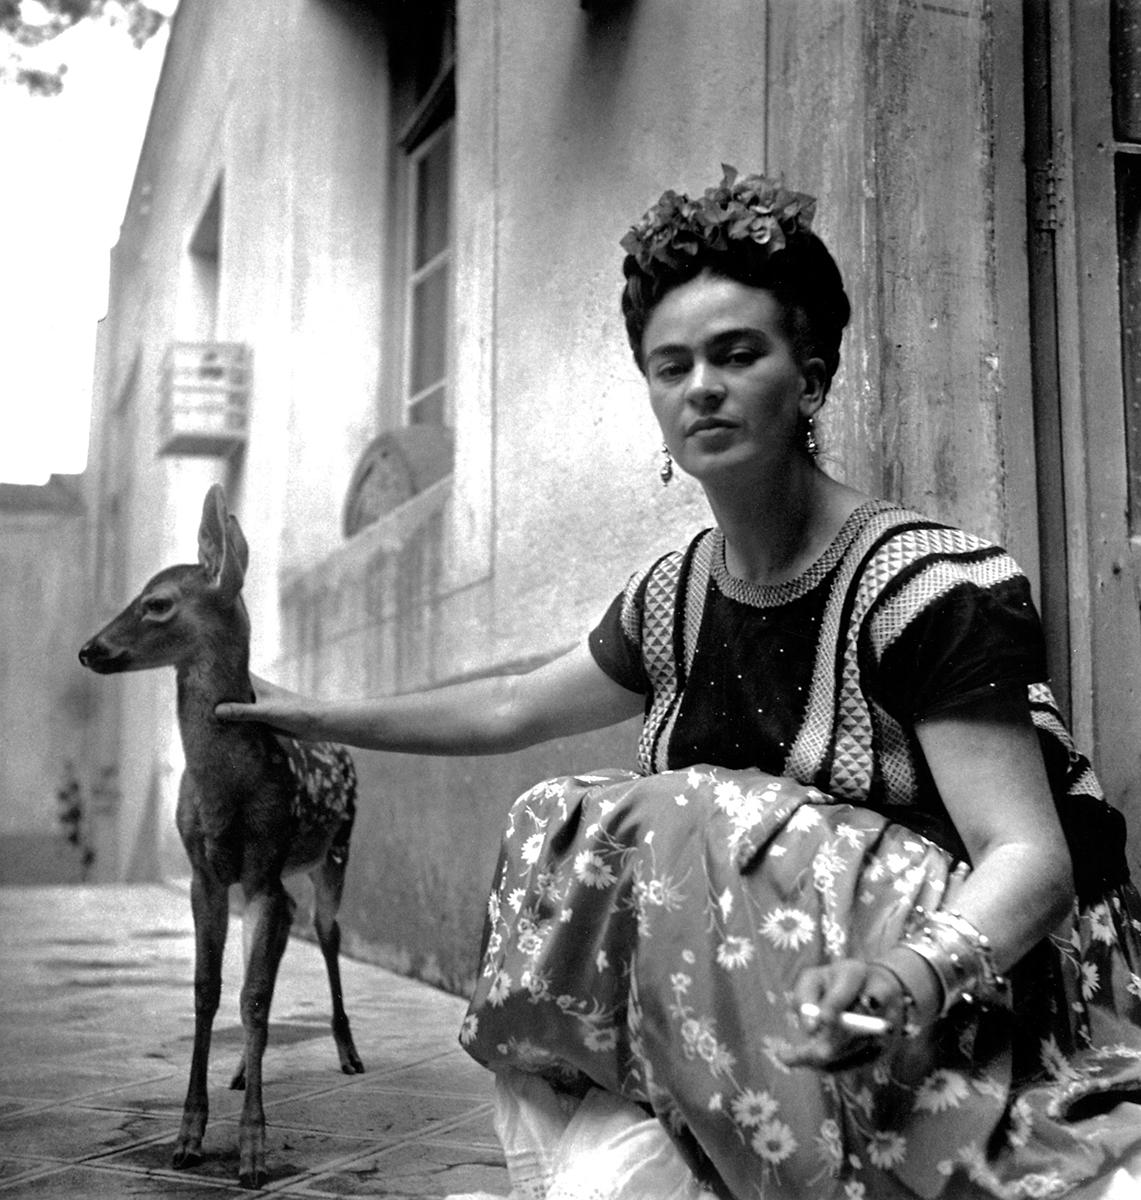 Frida with Granizo by Nickolas Muray is a black and white portrait of Mexican surrealist painter Frida Kahlo with her pet fawn, Granizo. 

Platinum Print
Image size: 11 x 10.5 in.
Paper size: 20 x 16 in.
Edition 21/30
Titled, dated, artist name,